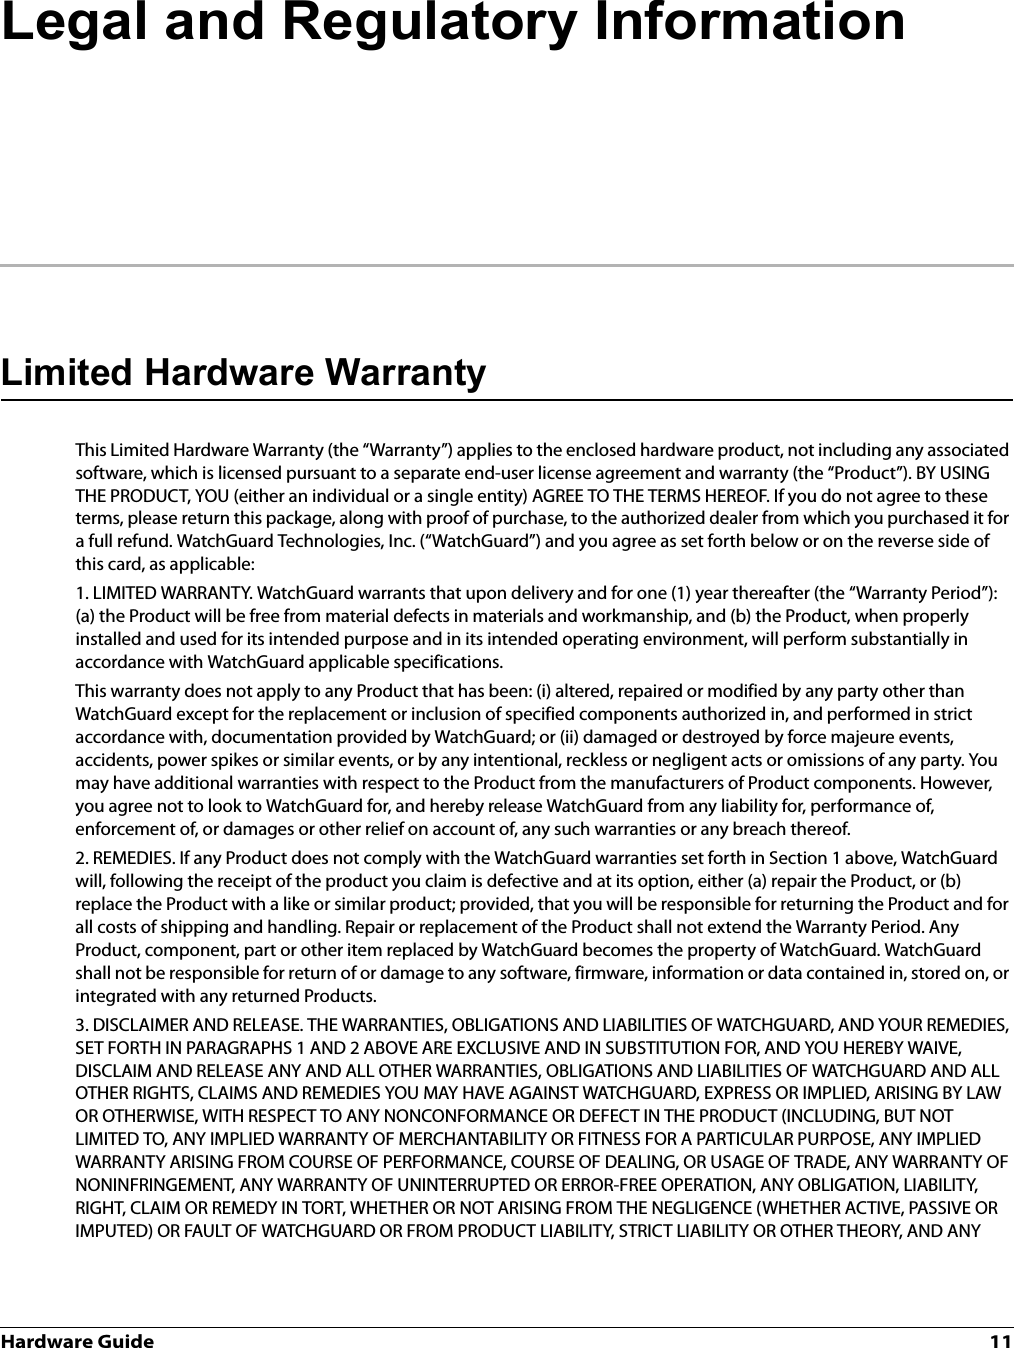 Hardware Guide 11Legal and Regulatory InformationLimited Hardware WarrantyThis Limited Hardware Warranty (the “Warranty”) applies to the enclosed hardware product, not including any associated software, which is licensed pursuant to a separate end-user license agreement and warranty (the “Product”). BY USING THE PRODUCT, YOU (either an individual or a single entity) AGREE TO THE TERMS HEREOF. If you do not agree to these terms, please return this package, along with proof of purchase, to the authorized dealer from which you purchased it for a full refund. WatchGuard Technologies, Inc. (“WatchGuard”) and you agree as set forth below or on the reverse side of this card, as applicable:1. LIMITED WARRANTY. WatchGuard warrants that upon delivery and for one (1) year thereafter (the “Warranty Period”): (a) the Product will be free from material defects in materials and workmanship, and (b) the Product, when properly installed and used for its intended purpose and in its intended operating environment, will perform substantially in accordance with WatchGuard applicable specifications.This warranty does not apply to any Product that has been: (i) altered, repaired or modified by any party other than WatchGuard except for the replacement or inclusion of specified components authorized in, and performed in strict accordance with, documentation provided by WatchGuard; or (ii) damaged or destroyed by force majeure events, accidents, power spikes or similar events, or by any intentional, reckless or negligent acts or omissions of any party. You may have additional warranties with respect to the Product from the manufacturers of Product components. However, you agree not to look to WatchGuard for, and hereby release WatchGuard from any liability for, performance of, enforcement of, or damages or other relief on account of, any such warranties or any breach thereof.2. REMEDIES. If any Product does not comply with the WatchGuard warranties set forth in Section 1 above, WatchGuard will, following the receipt of the product you claim is defective and at its option, either (a) repair the Product, or (b) replace the Product with a like or similar product; provided, that you will be responsible for returning the Product and for all costs of shipping and handling. Repair or replacement of the Product shall not extend the Warranty Period. Any Product, component, part or other item replaced by WatchGuard becomes the property of WatchGuard. WatchGuard shall not be responsible for return of or damage to any software, firmware, information or data contained in, stored on, or integrated with any returned Products.3. DISCLAIMER AND RELEASE. THE WARRANTIES, OBLIGATIONS AND LIABILITIES OF WATCHGUARD, AND YOUR REMEDIES, SET FORTH IN PARAGRAPHS 1 AND 2 ABOVE ARE EXCLUSIVE AND IN SUBSTITUTION FOR, AND YOU HEREBY WAIVE, DISCLAIM AND RELEASE ANY AND ALL OTHER WARRANTIES, OBLIGATIONS AND LIABILITIES OF WATCHGUARD AND ALL OTHER RIGHTS, CLAIMS AND REMEDIES YOU MAY HAVE AGAINST WATCHGUARD, EXPRESS OR IMPLIED, ARISING BY LAW OR OTHERWISE, WITH RESPECT TO ANY NONCONFORMANCE OR DEFECT IN THE PRODUCT (INCLUDING, BUT NOT LIMITED TO, ANY IMPLIED WARRANTY OF MERCHANTABILITY OR FITNESS FOR A PARTICULAR PURPOSE, ANY IMPLIED WARRANTY ARISING FROM COURSE OF PERFORMANCE, COURSE OF DEALING, OR USAGE OF TRADE, ANY WARRANTY OF NONINFRINGEMENT, ANY WARRANTY OF UNINTERRUPTED OR ERROR-FREE OPERATION, ANY OBLIGATION, LIABILITY, RIGHT, CLAIM OR REMEDY IN TORT, WHETHER OR NOT ARISING FROM THE NEGLIGENCE (WHETHER ACTIVE, PASSIVE OR IMPUTED) OR FAULT OF WATCHGUARD OR FROM PRODUCT LIABILITY, STRICT LIABILITY OR OTHER THEORY, AND ANY 